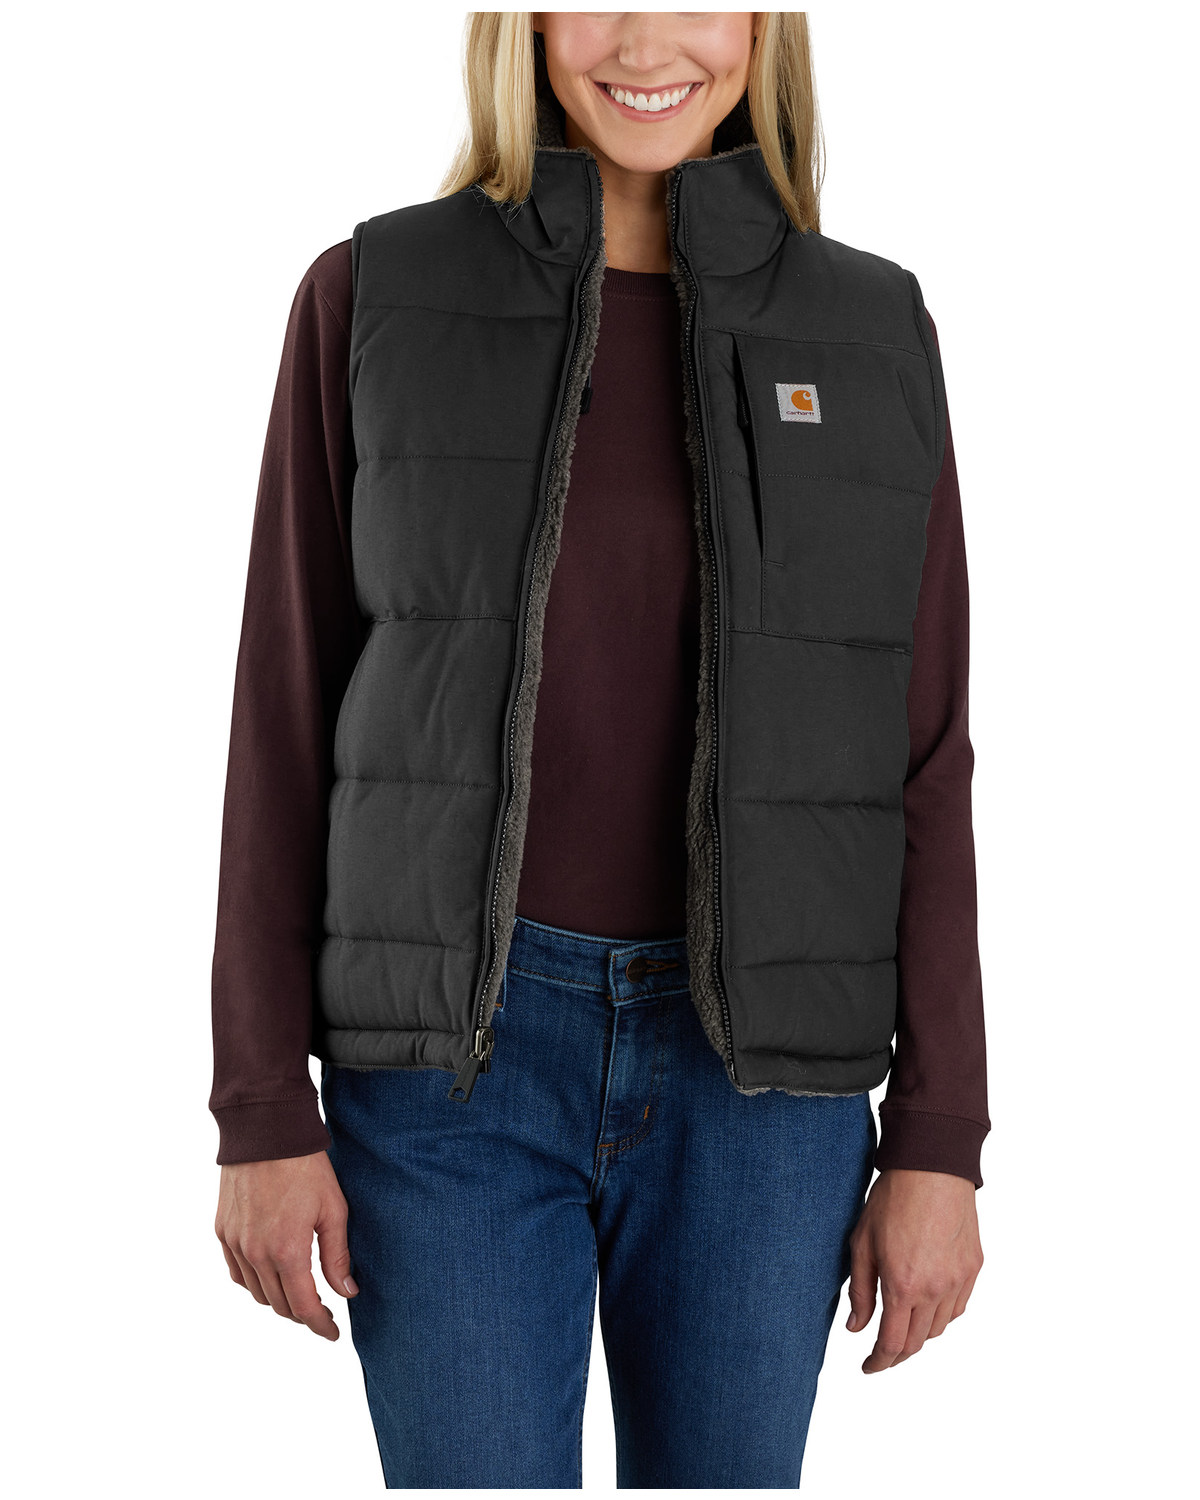 Carhartt Women's Montana Reversible Relaxed Fit Insulated Work Vest